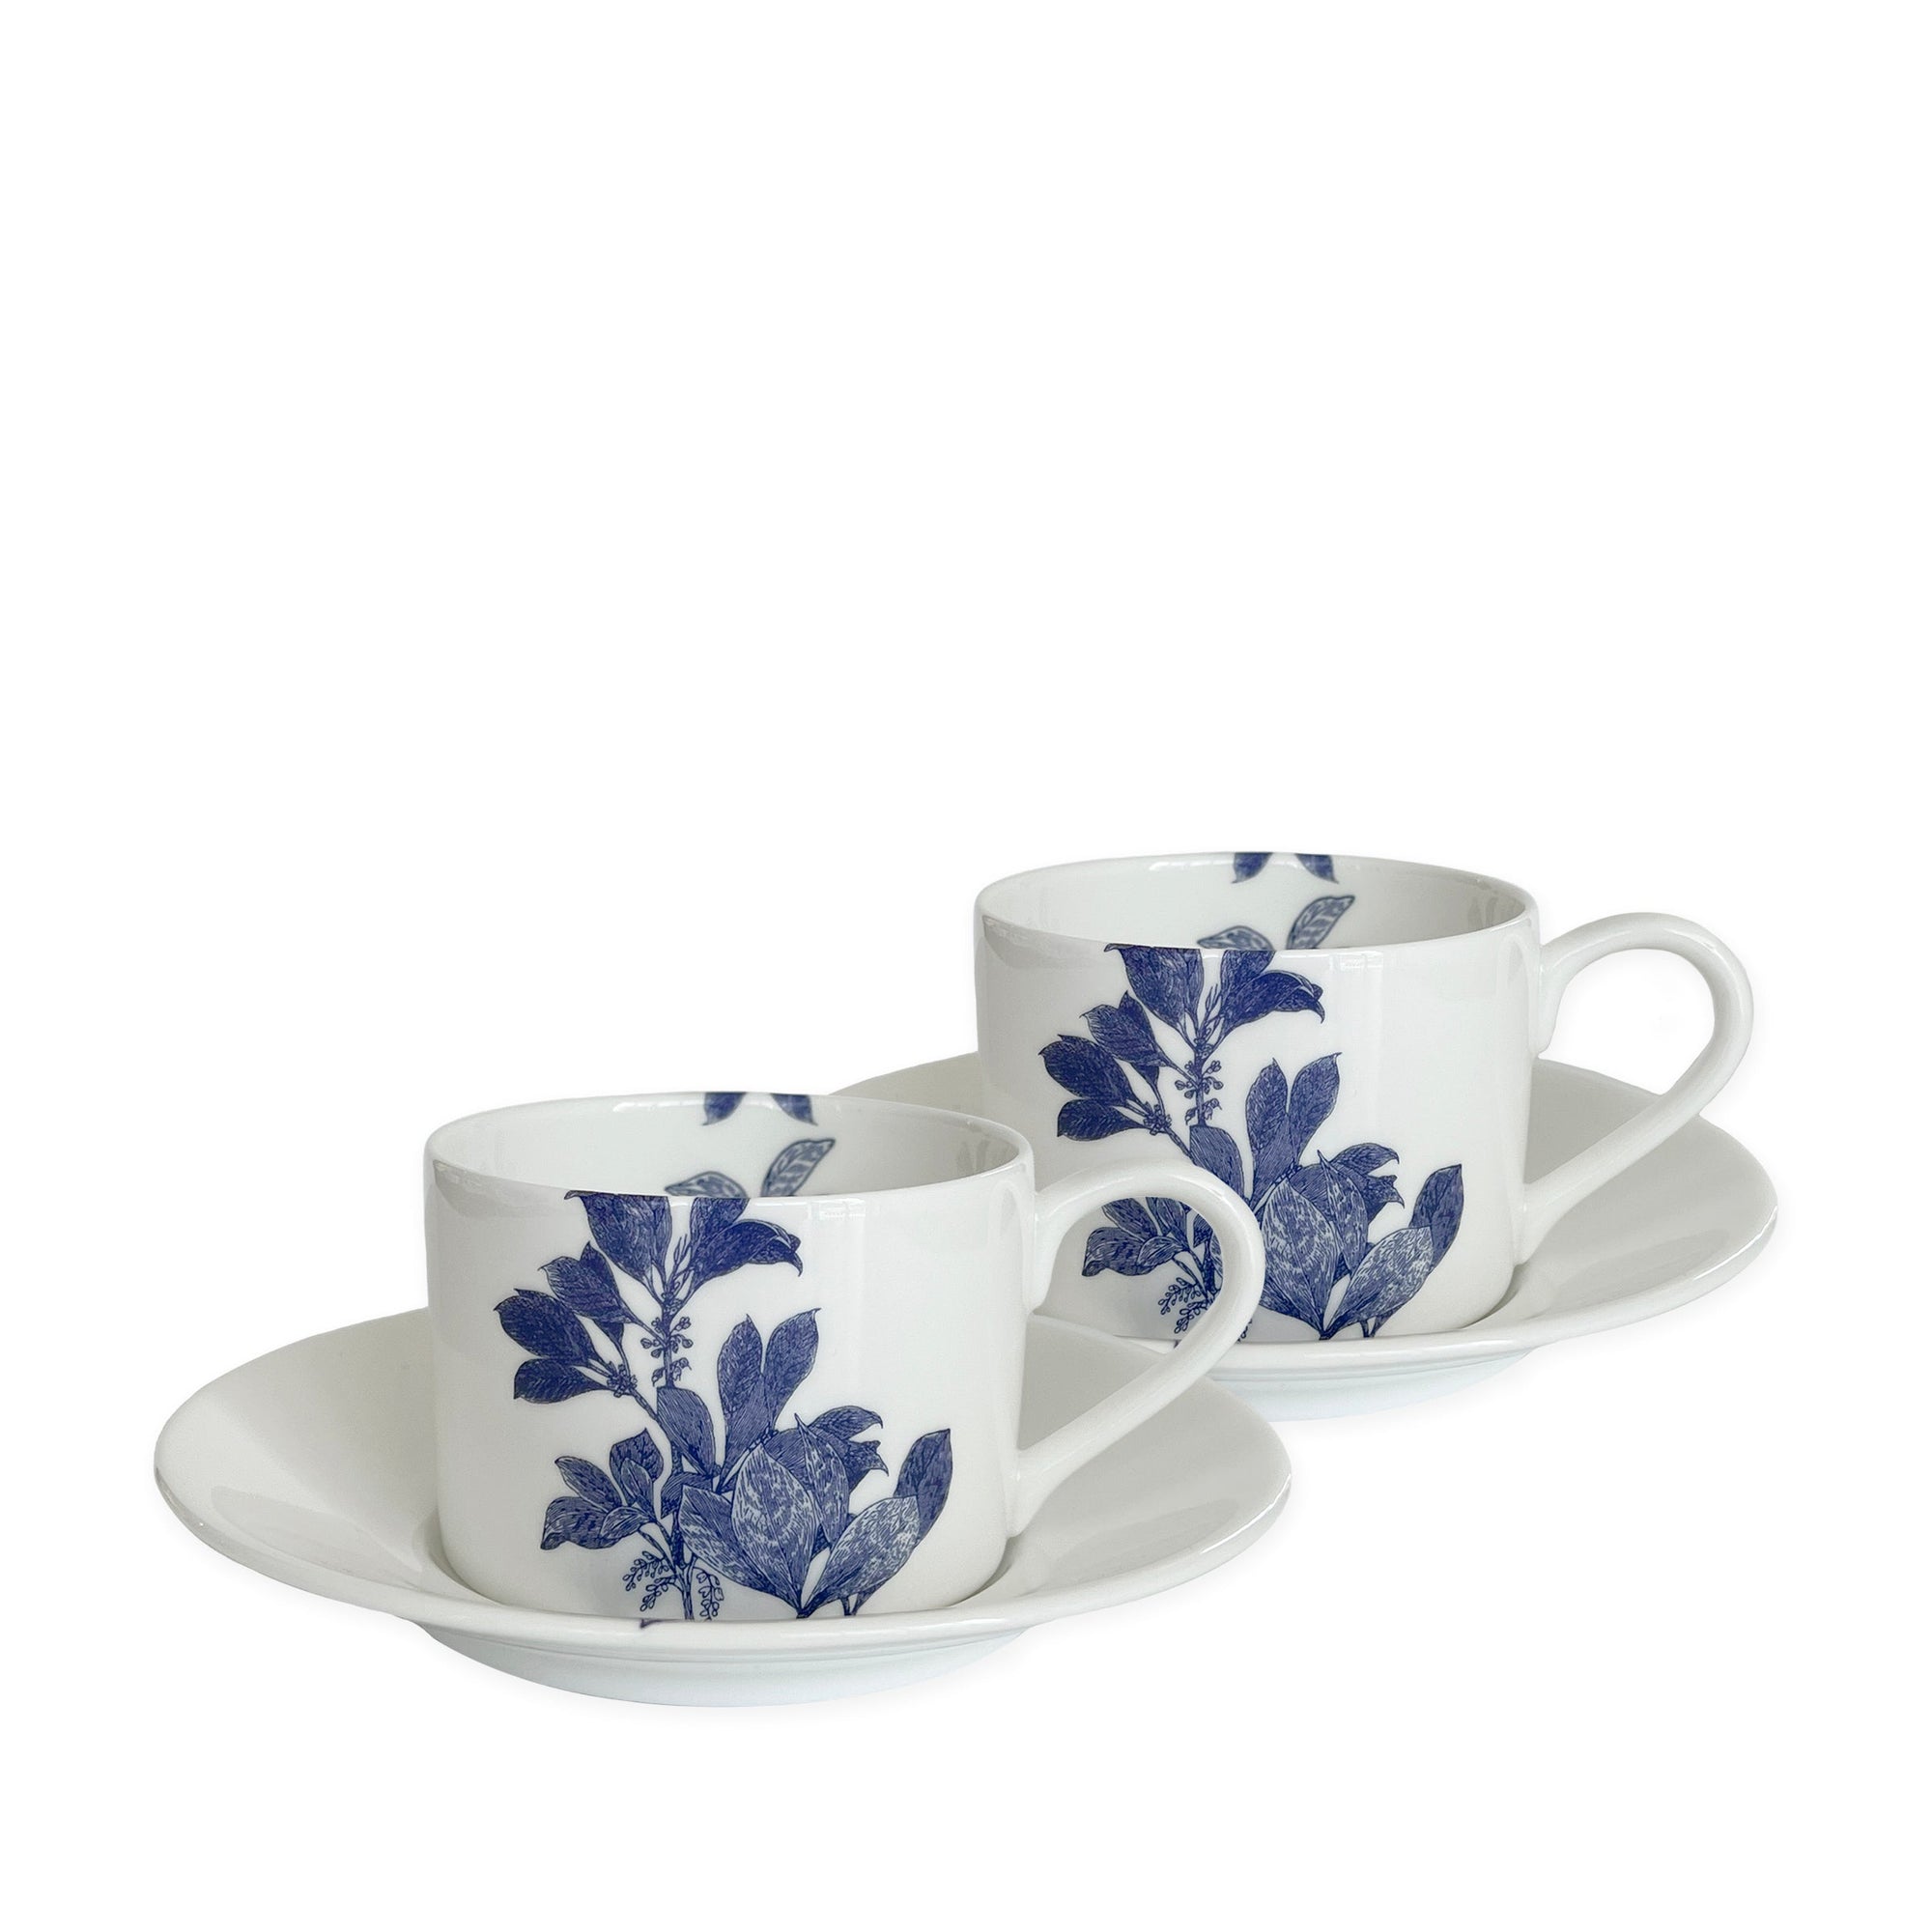 Two white bone china cups with matching saucers, decorated with blue floral patterns, are placed side by side against a white background. This elegant blue and white dinnerware, the Arbor Cups & Saucers, Set of 2 from Caskata Artisanal Home, is both dishwasher and microwave safe.